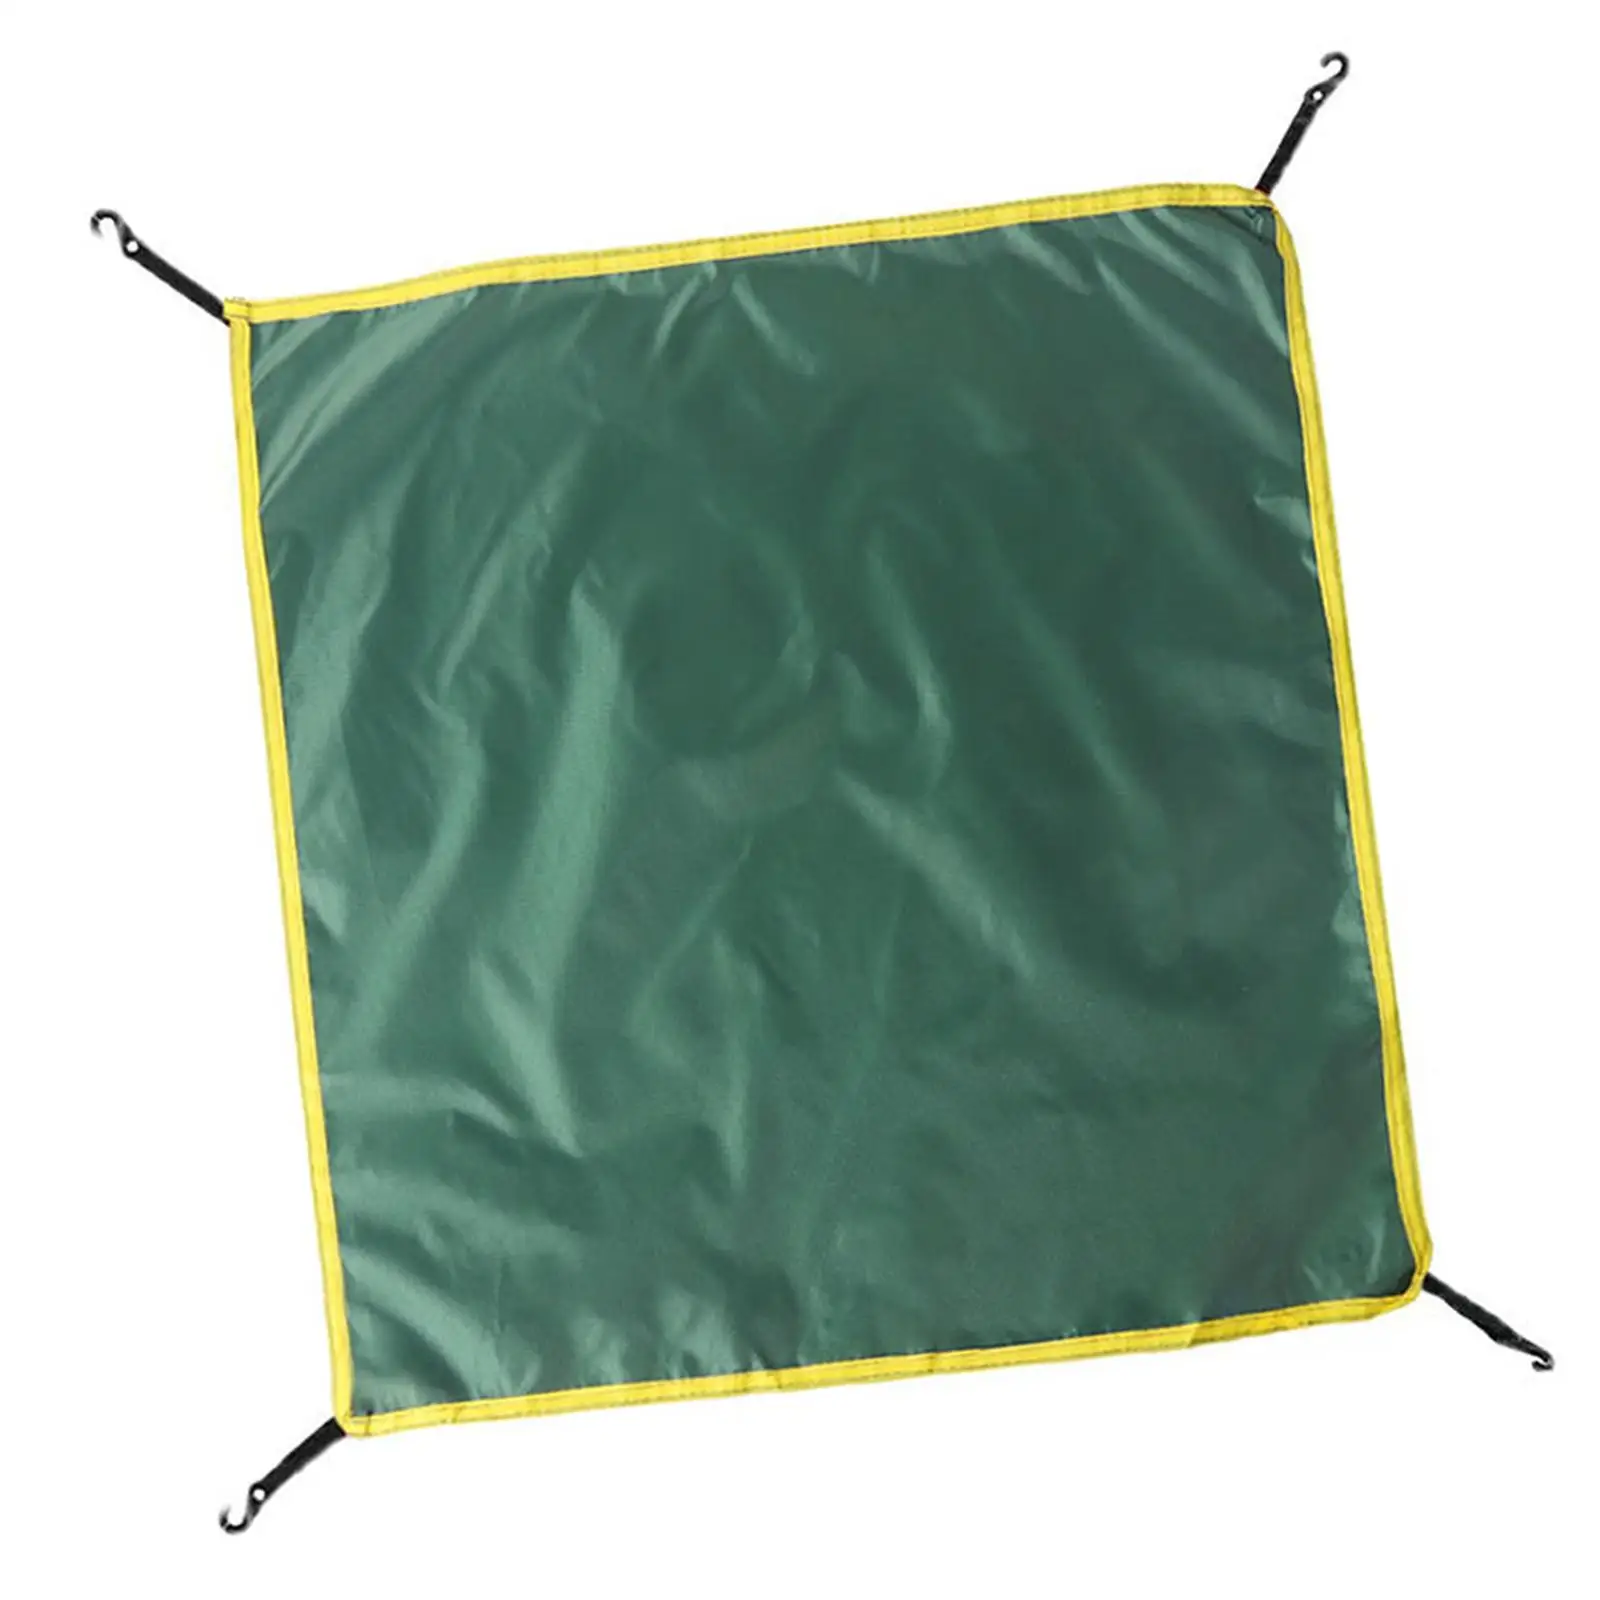 Rainfly Accessory Lightweight Tarp Fits 3-4 Person Instant Tent for Hiking